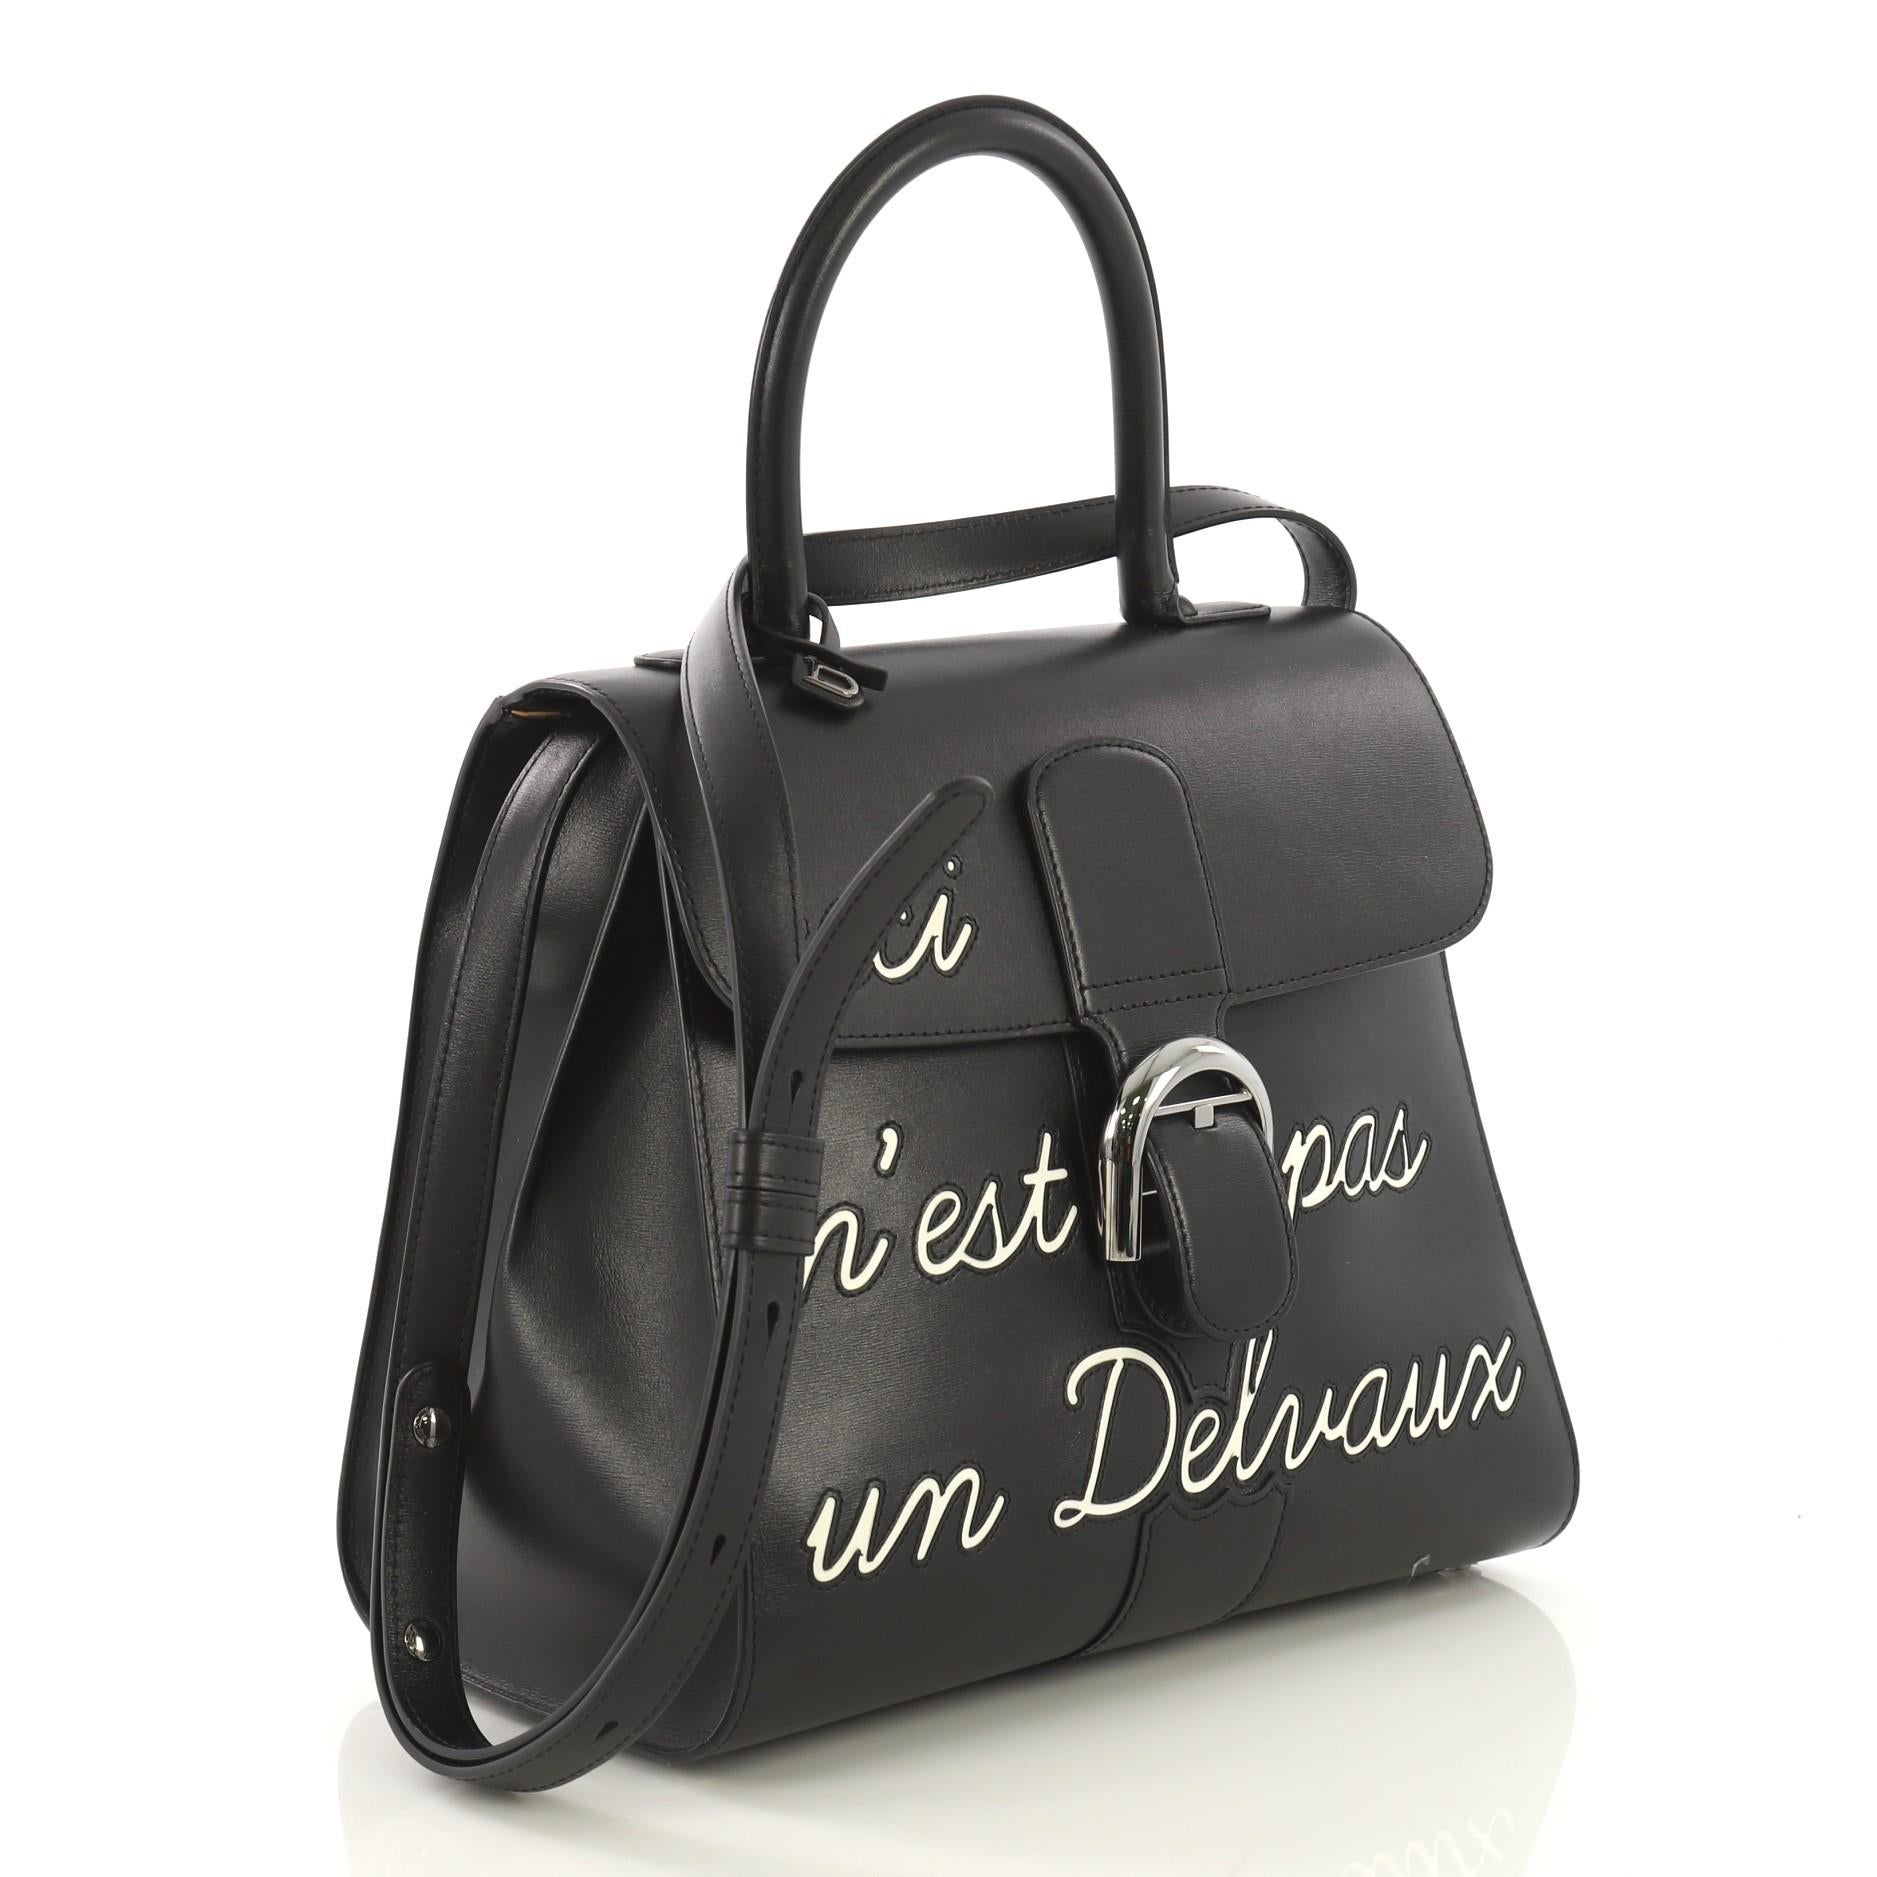 This Delvaux Brillant Top Handle Bag Limited Edition Leather MM, crafted from black leather, features rolled leather top handle, stylized 